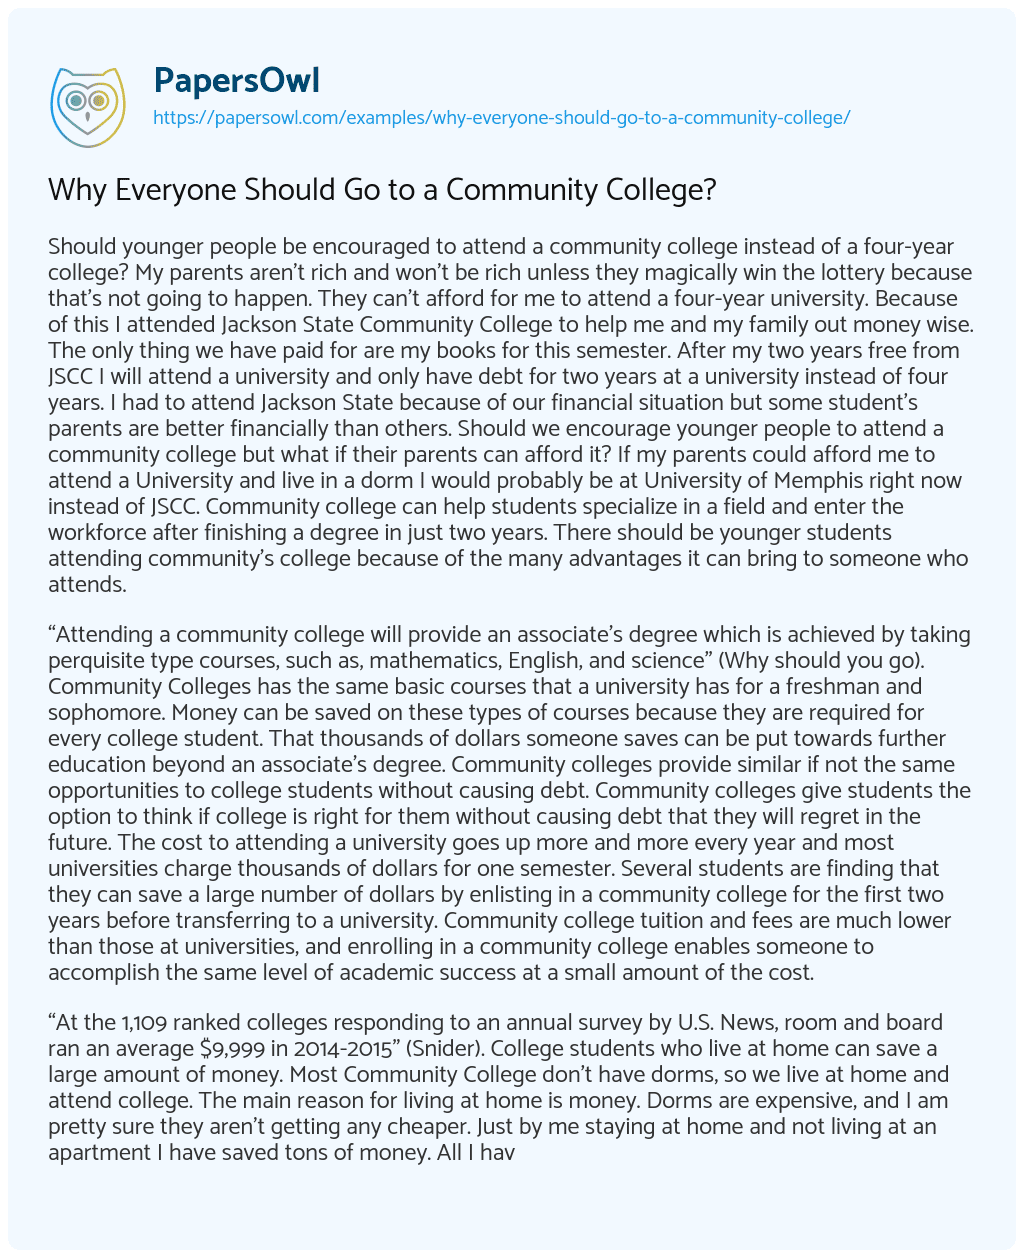 Essay on Why Everyone should Go to a Community College?